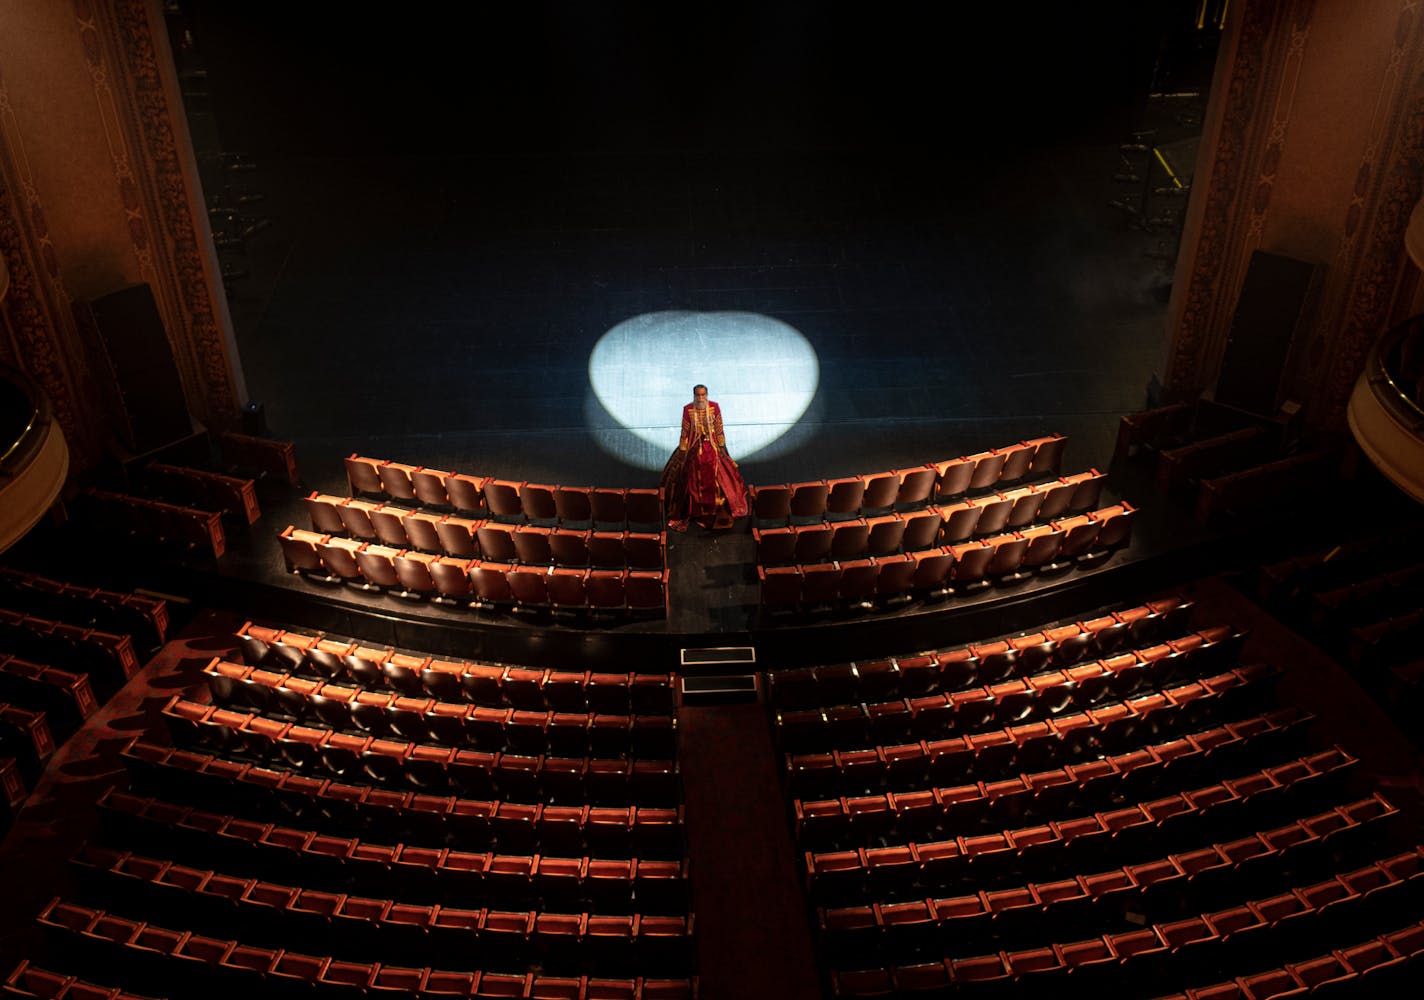 Theater stage and seating with one person at the front of the stage with a spotlight behind them